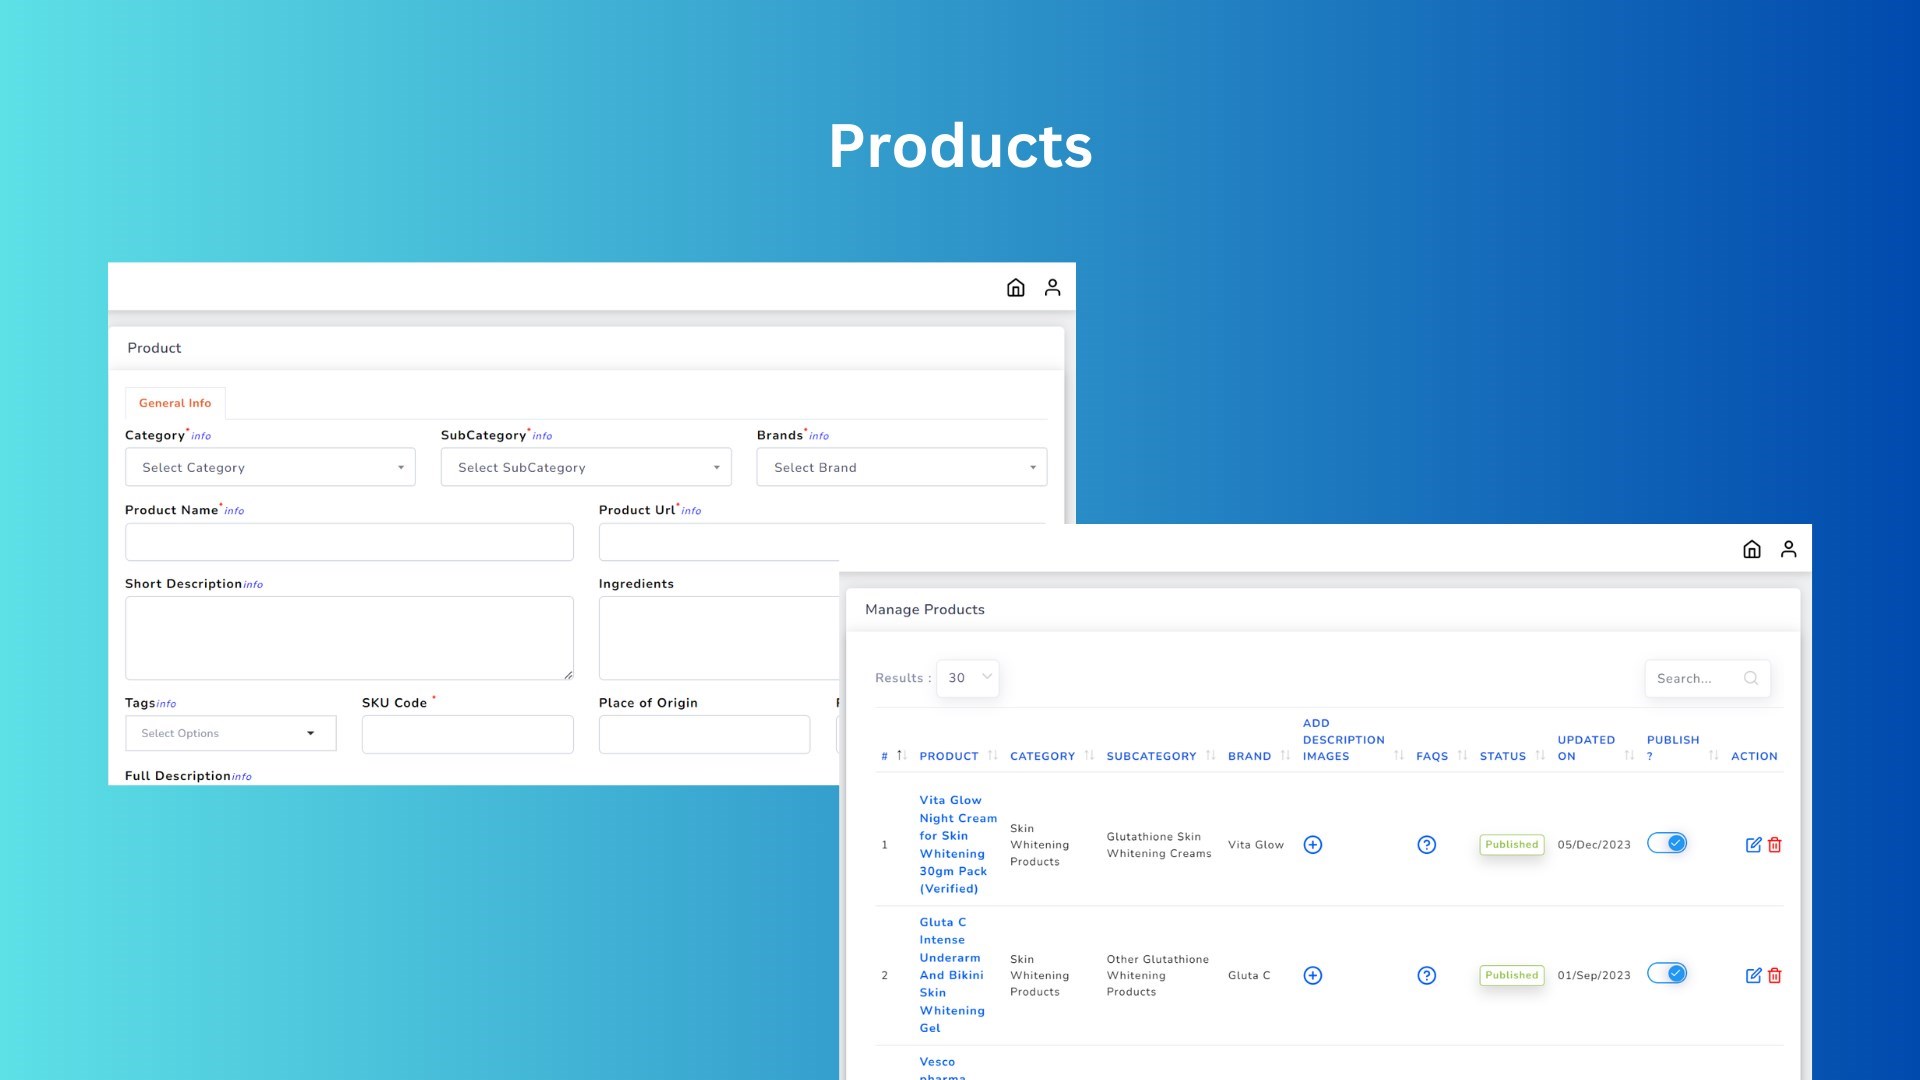 Feature to manage products with customizable pricing, allowing users to set individualized prices for products. Additionally, users can add product-related FAQs and images to enhance the product information and presentation.